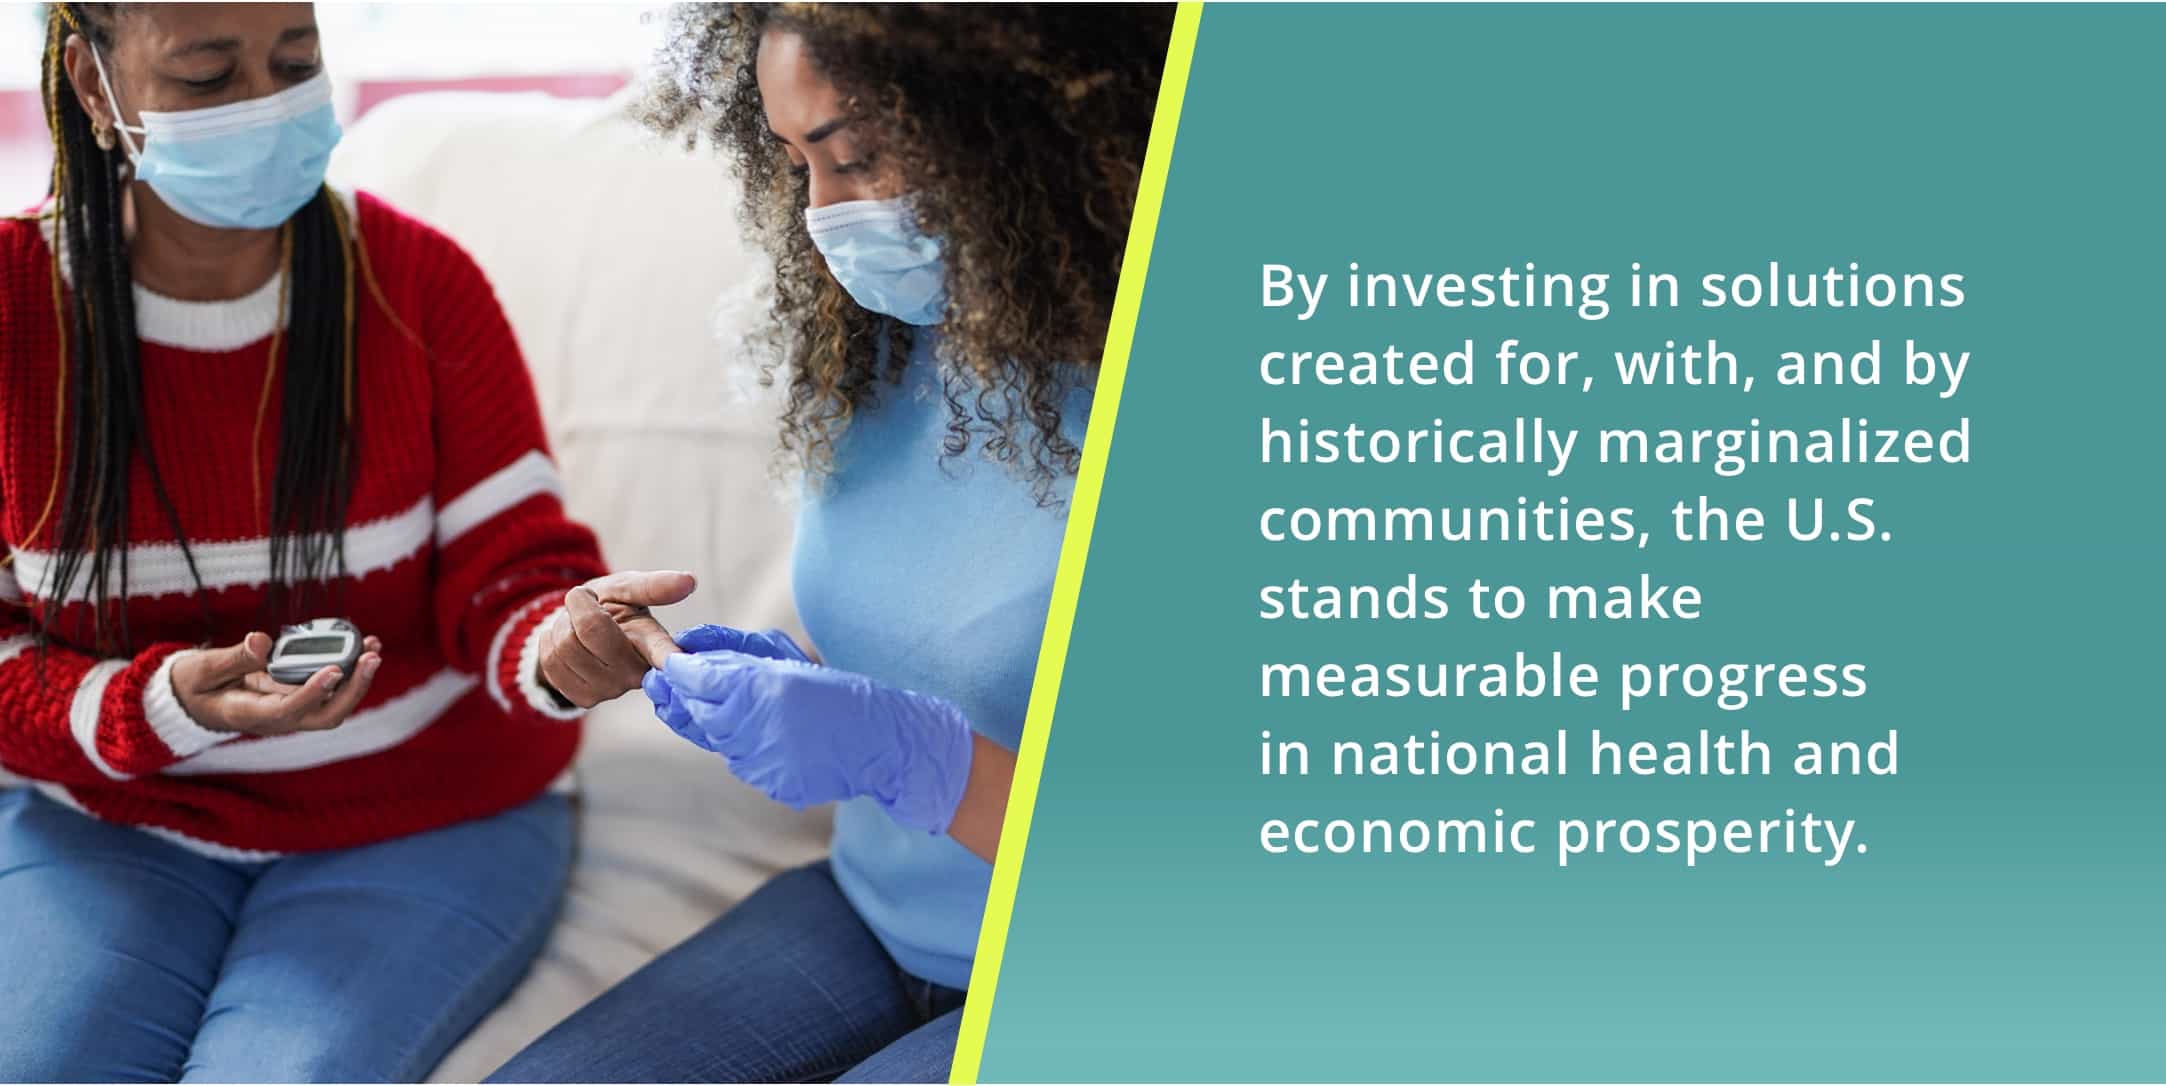 By investing in solutions created for, with, and by historically marginalized communities, the U.S. stands to make measurable progress in national health and economic prosperity.